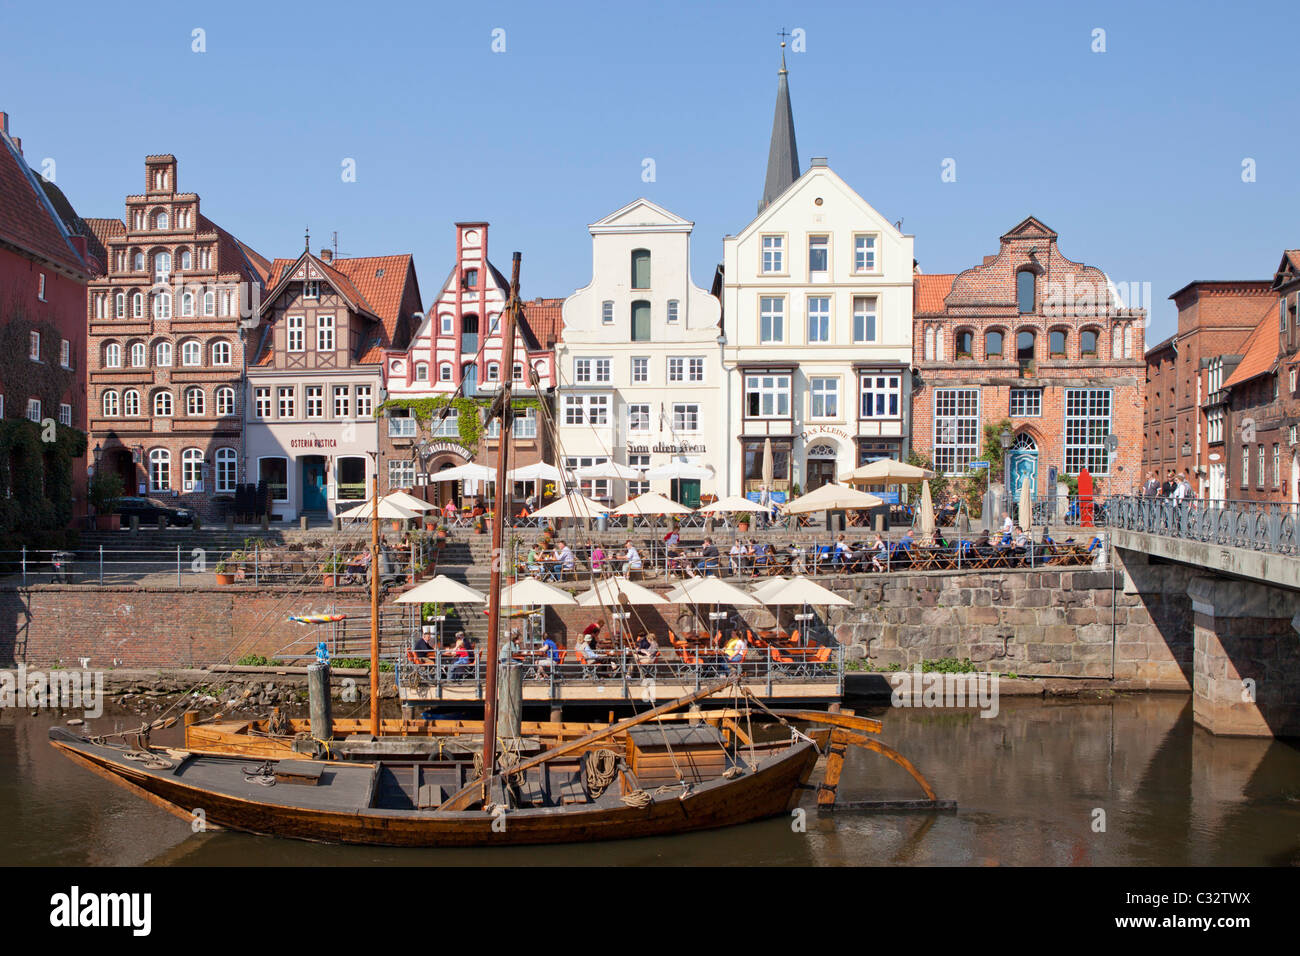 Am Stintmarkt, sculler and pram in the old harbour, Lueneburg, Lower Saxony, Germany Stock Photo